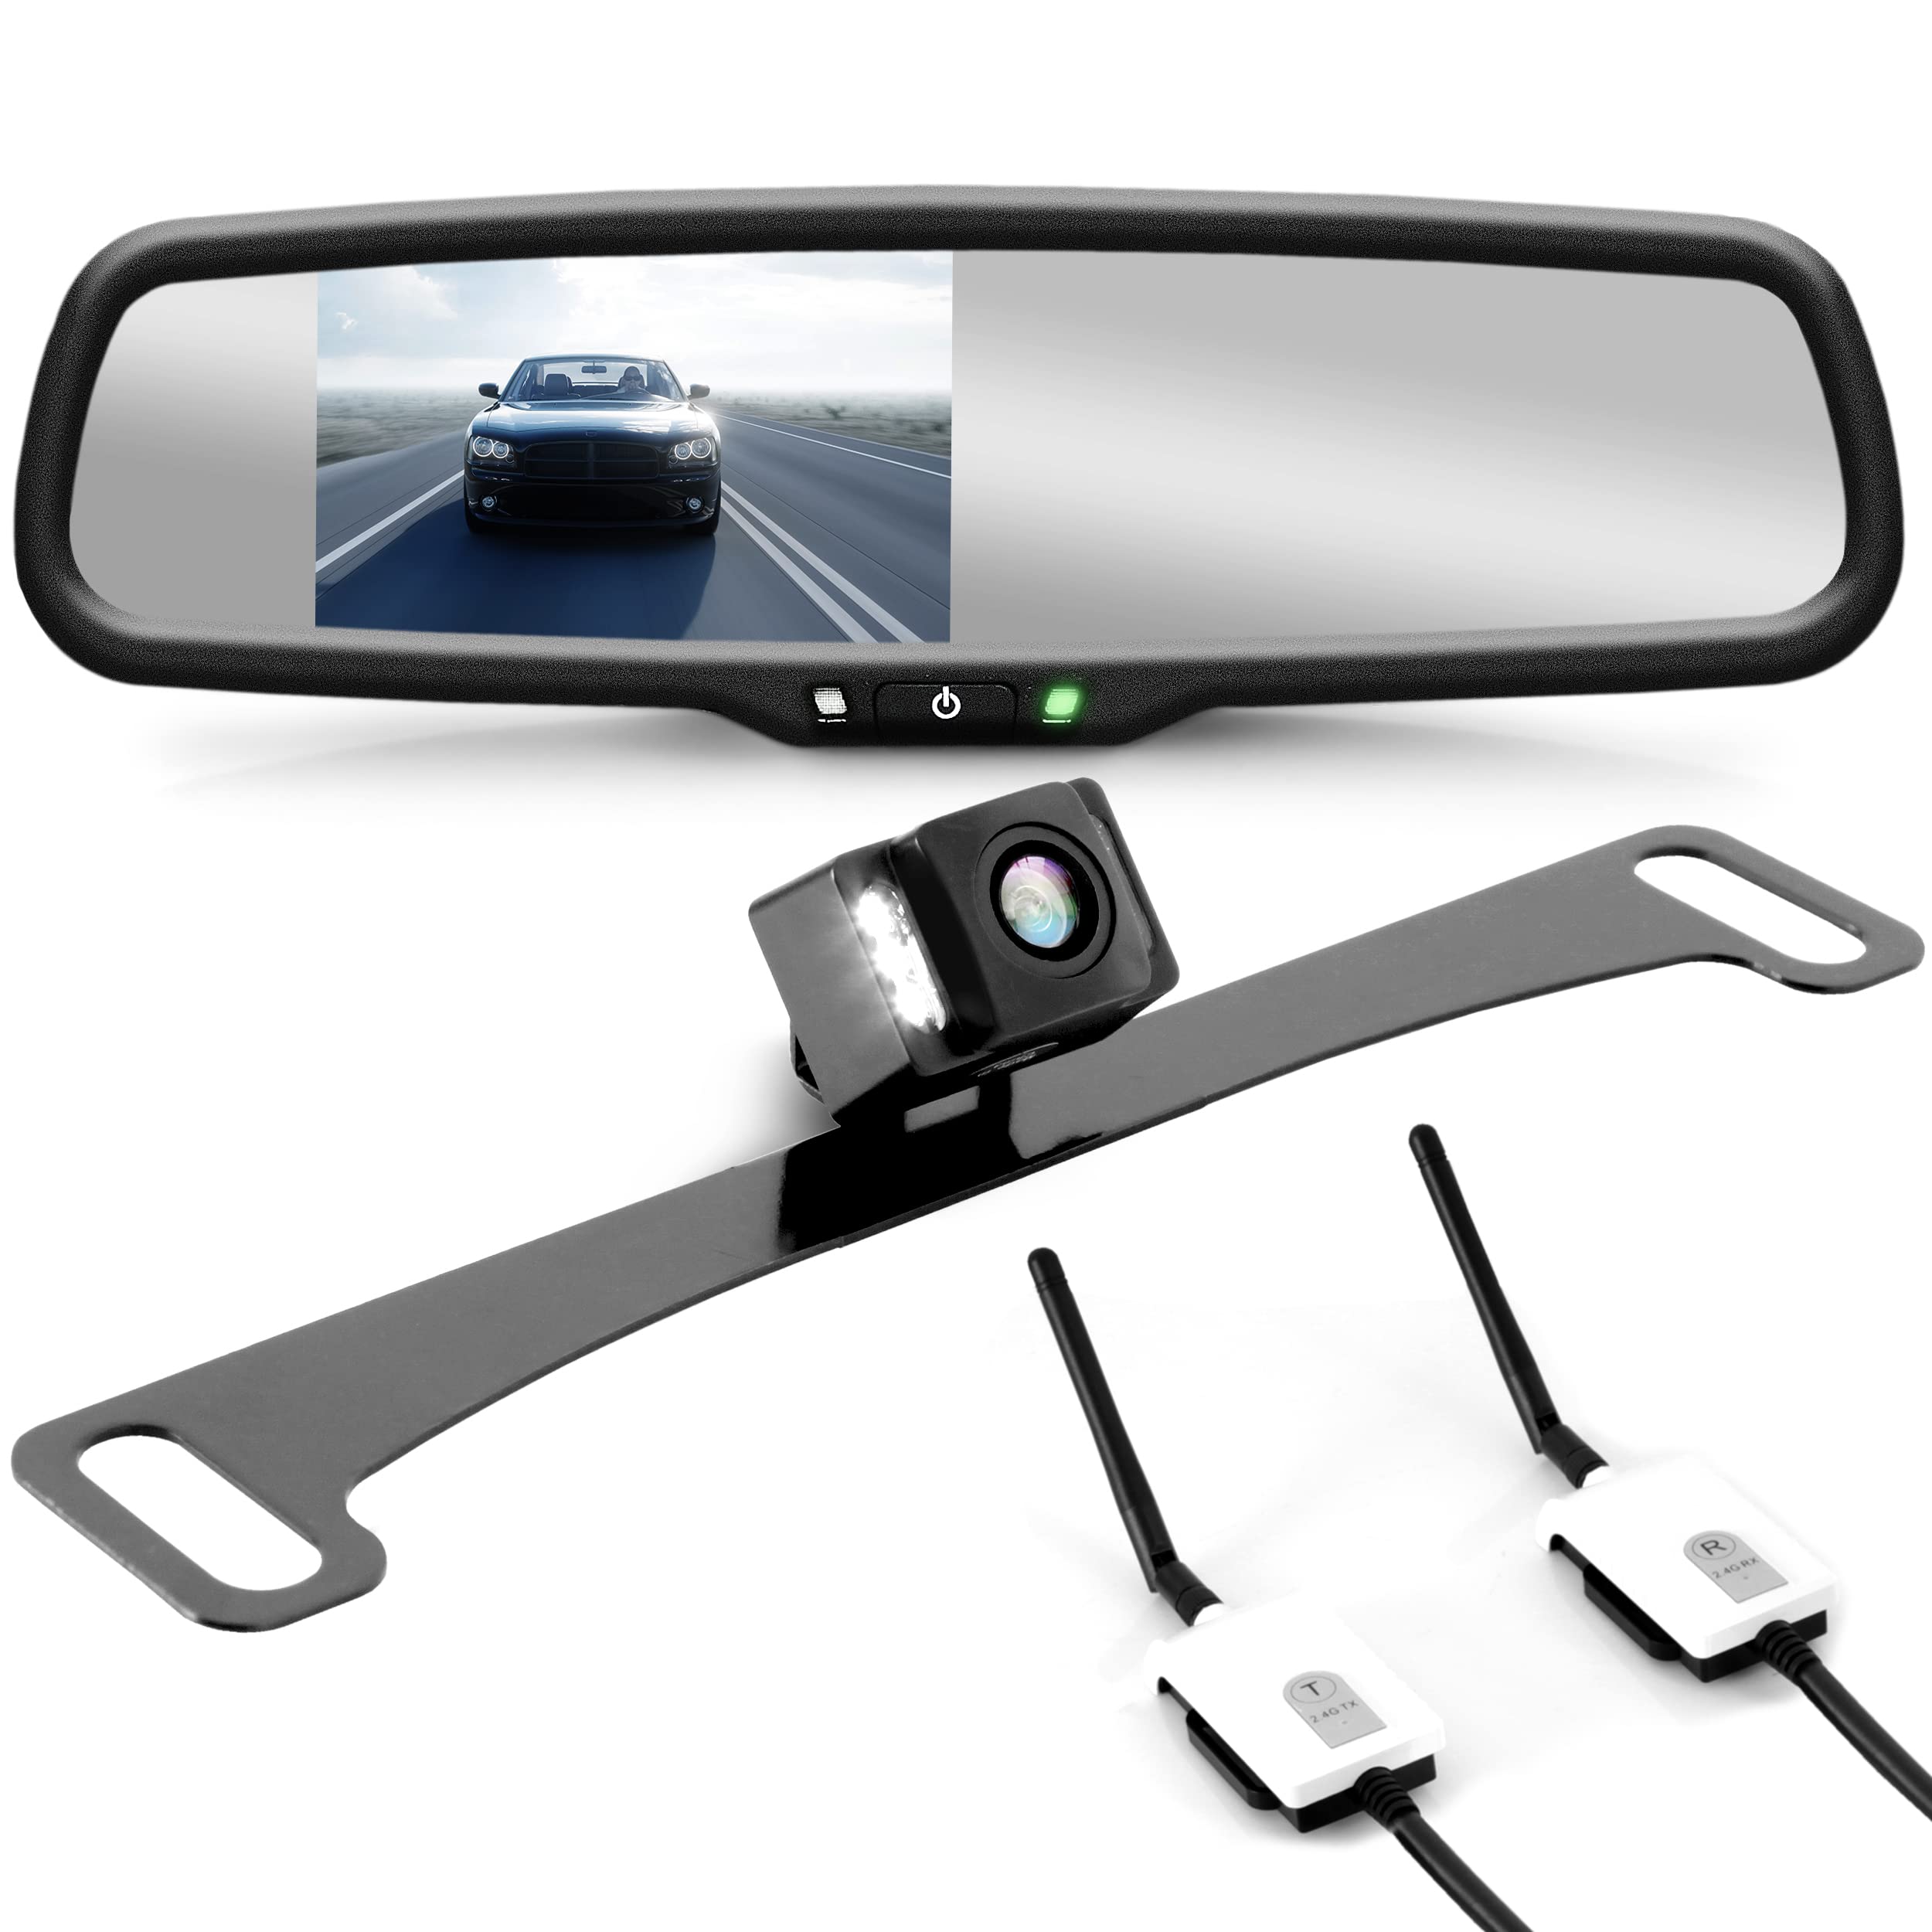 Pyle Wireless Backup Rear View Camera - Waterproof License Plate Car Parking Rearview Reverse Safety/Vehicle Monitor System w/ 4.3” Mirror Video LCD, Distance Scale Lines, Night Vision - PLCM4590WIR